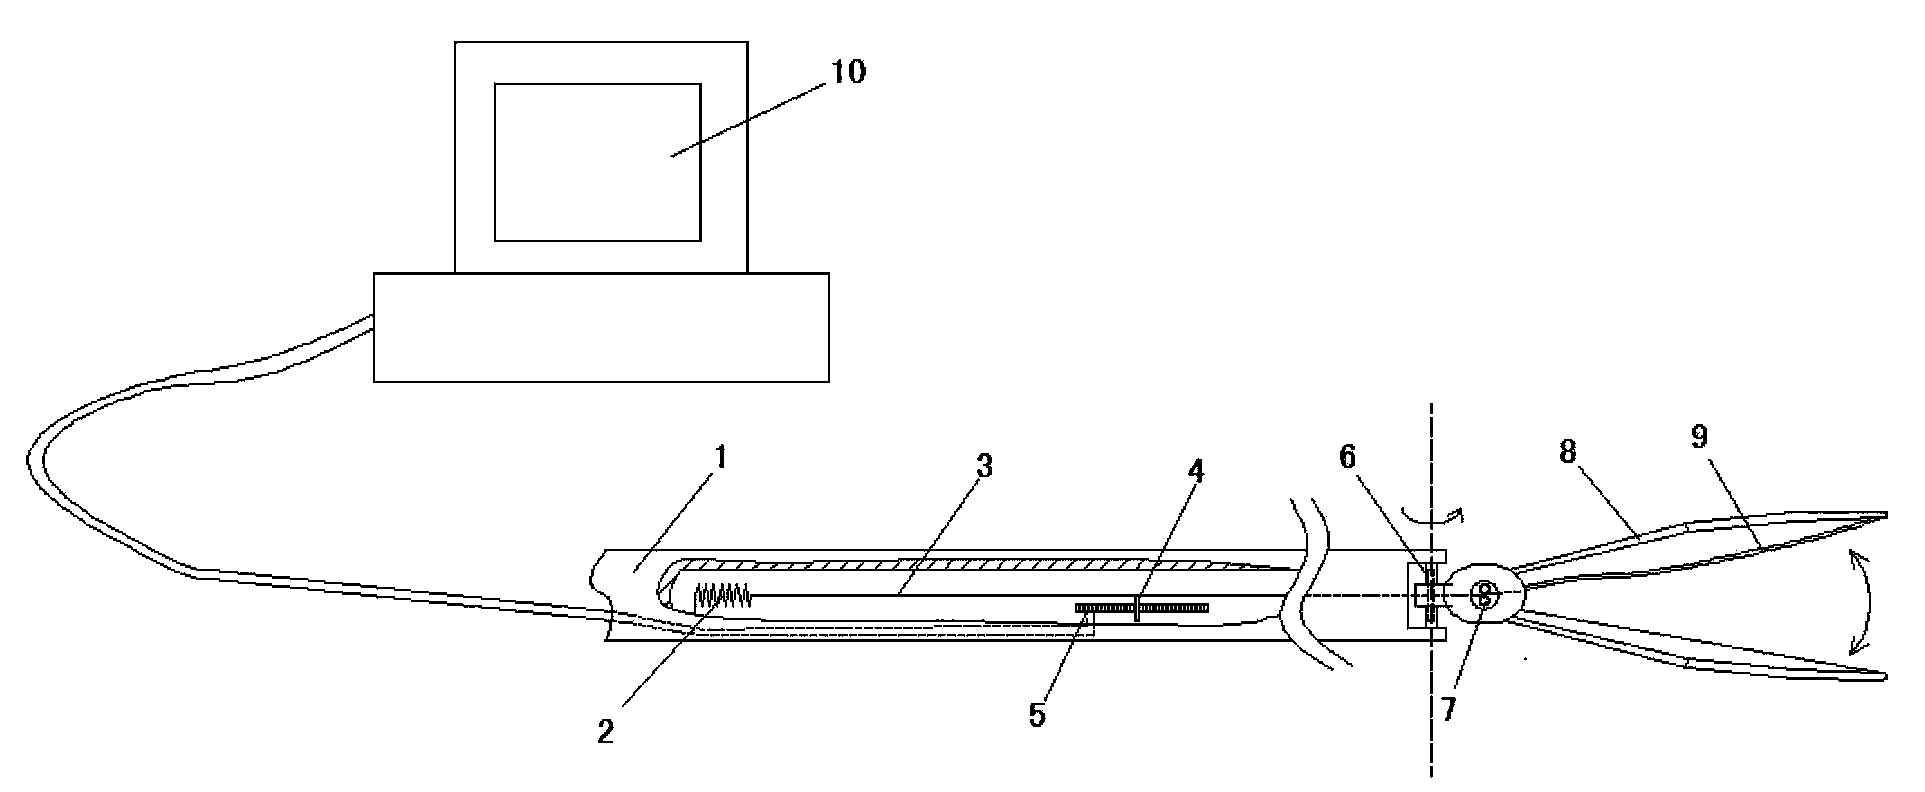 Tactile feedback system of minimally invasive surgery instrument